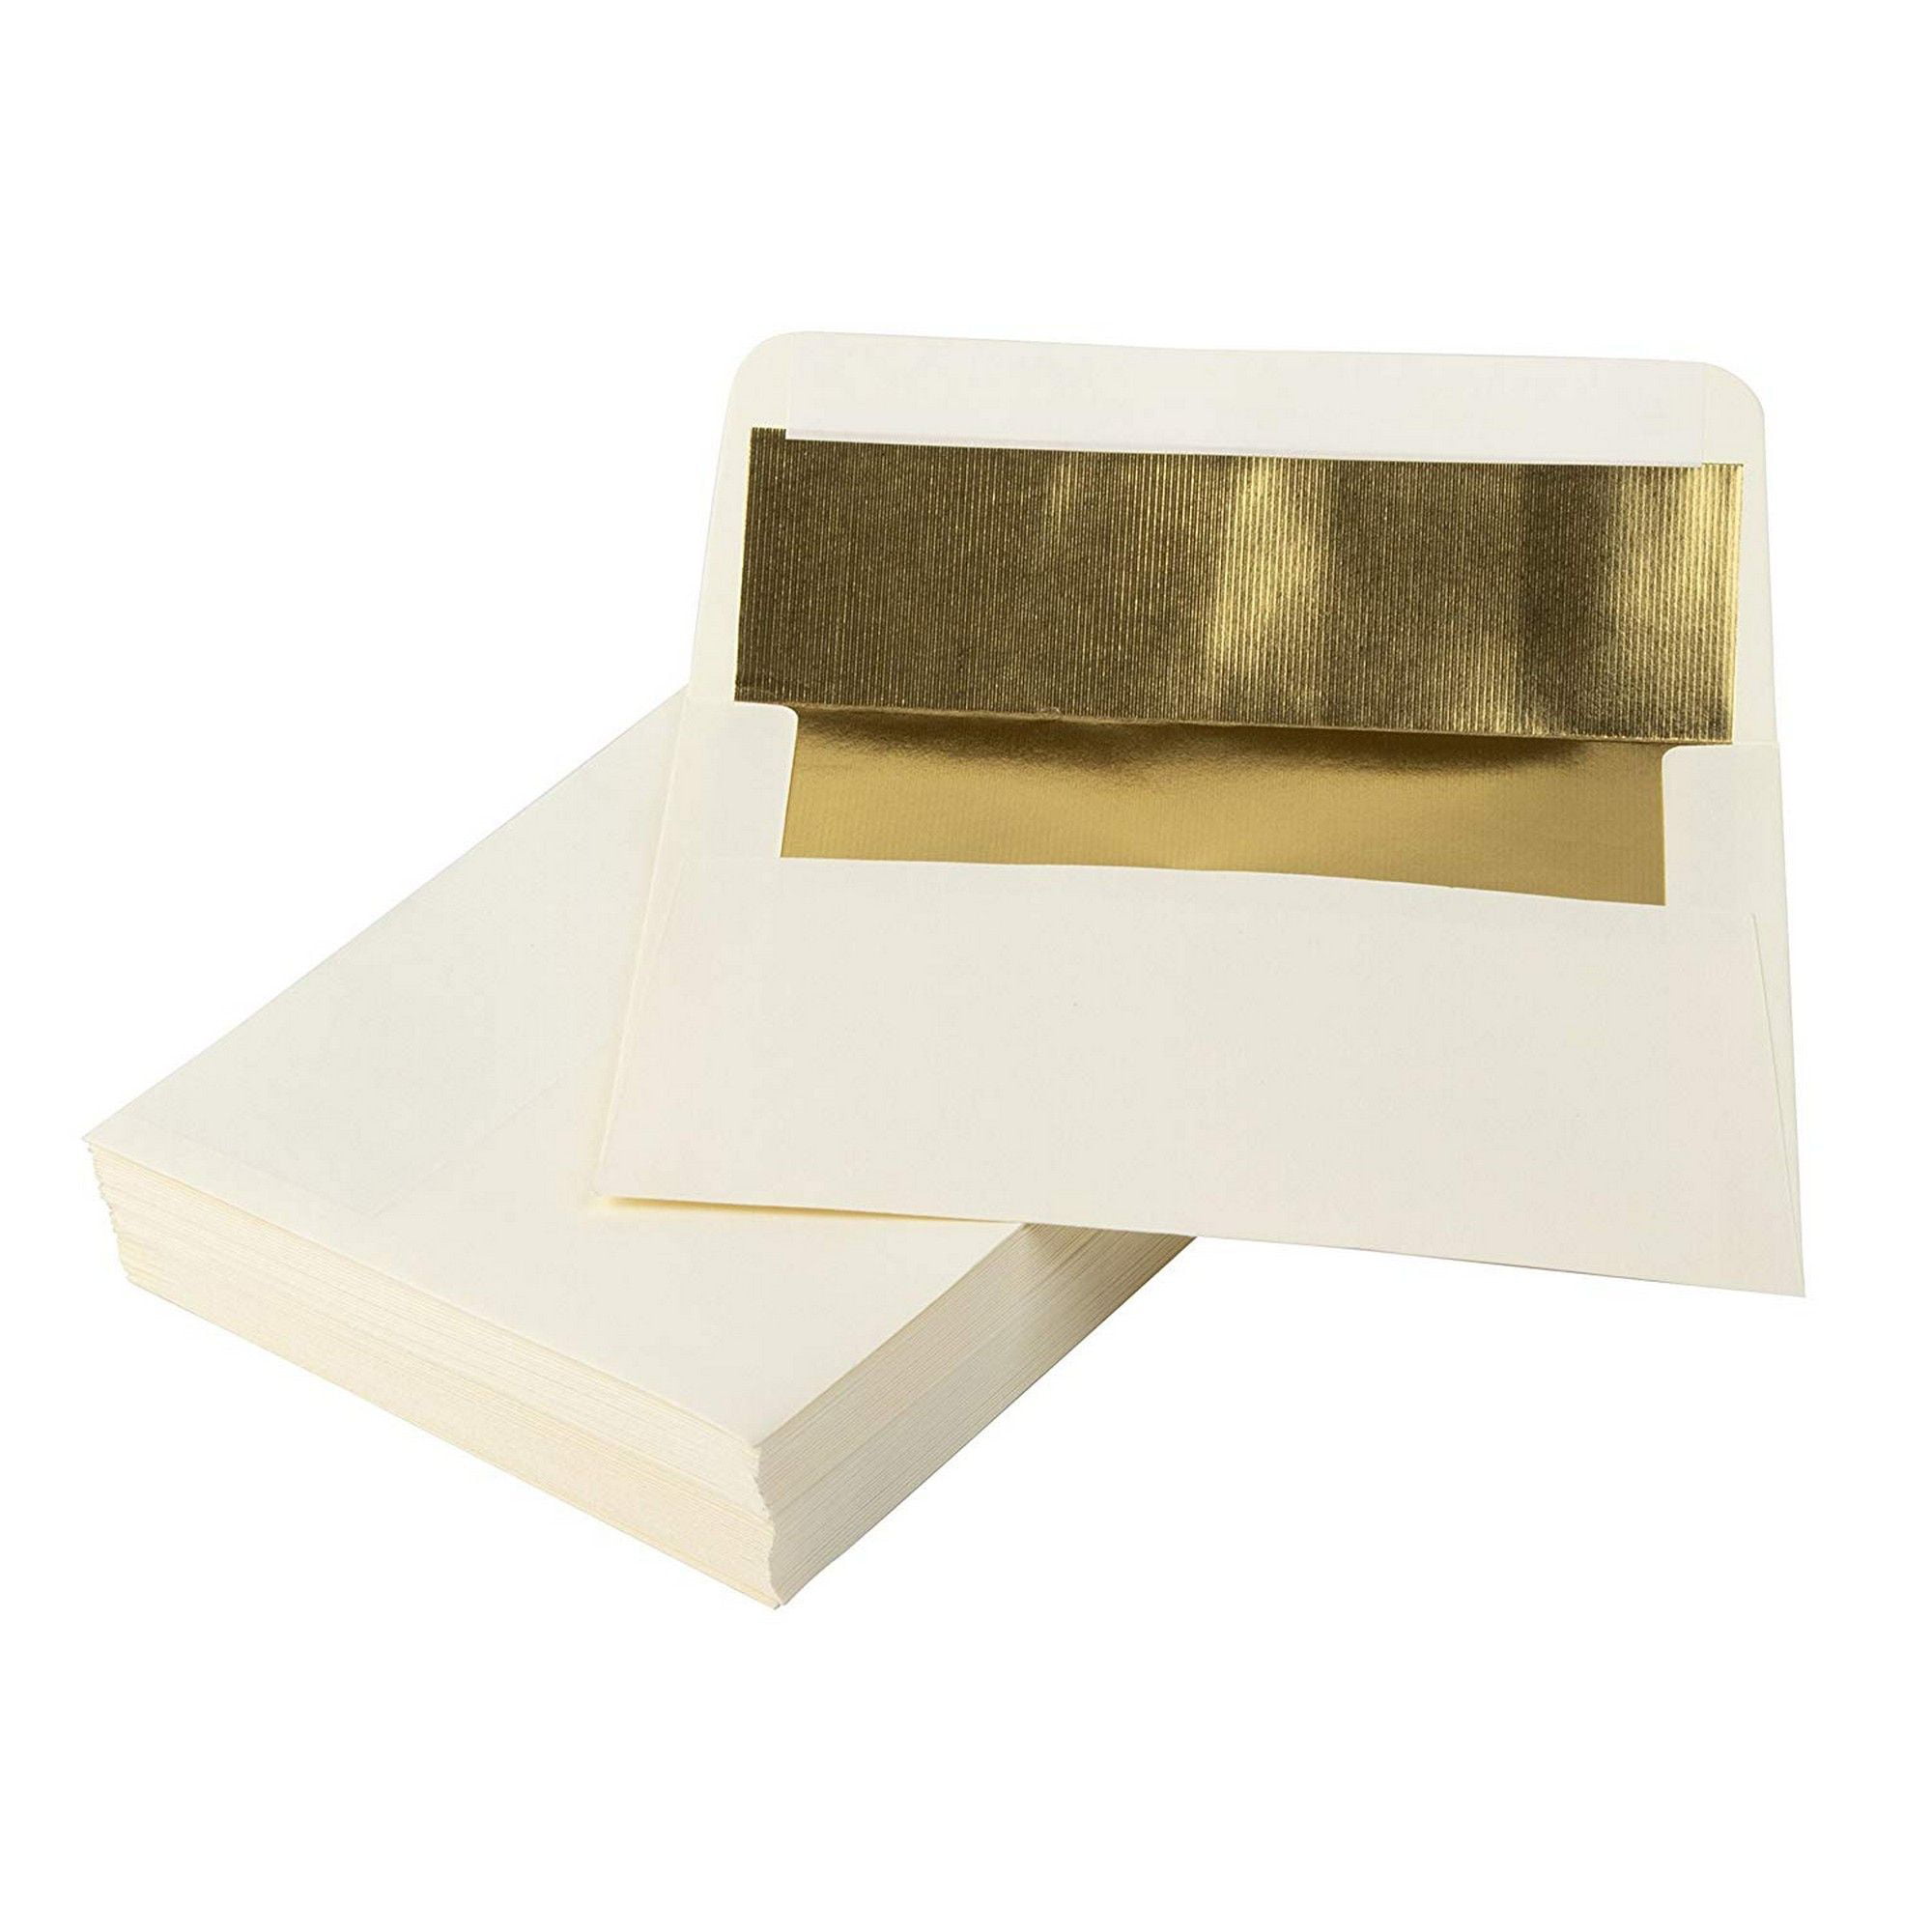 50-pack-5x7-envelopes-for-invitation-a7-gold-foil-lined-luxury